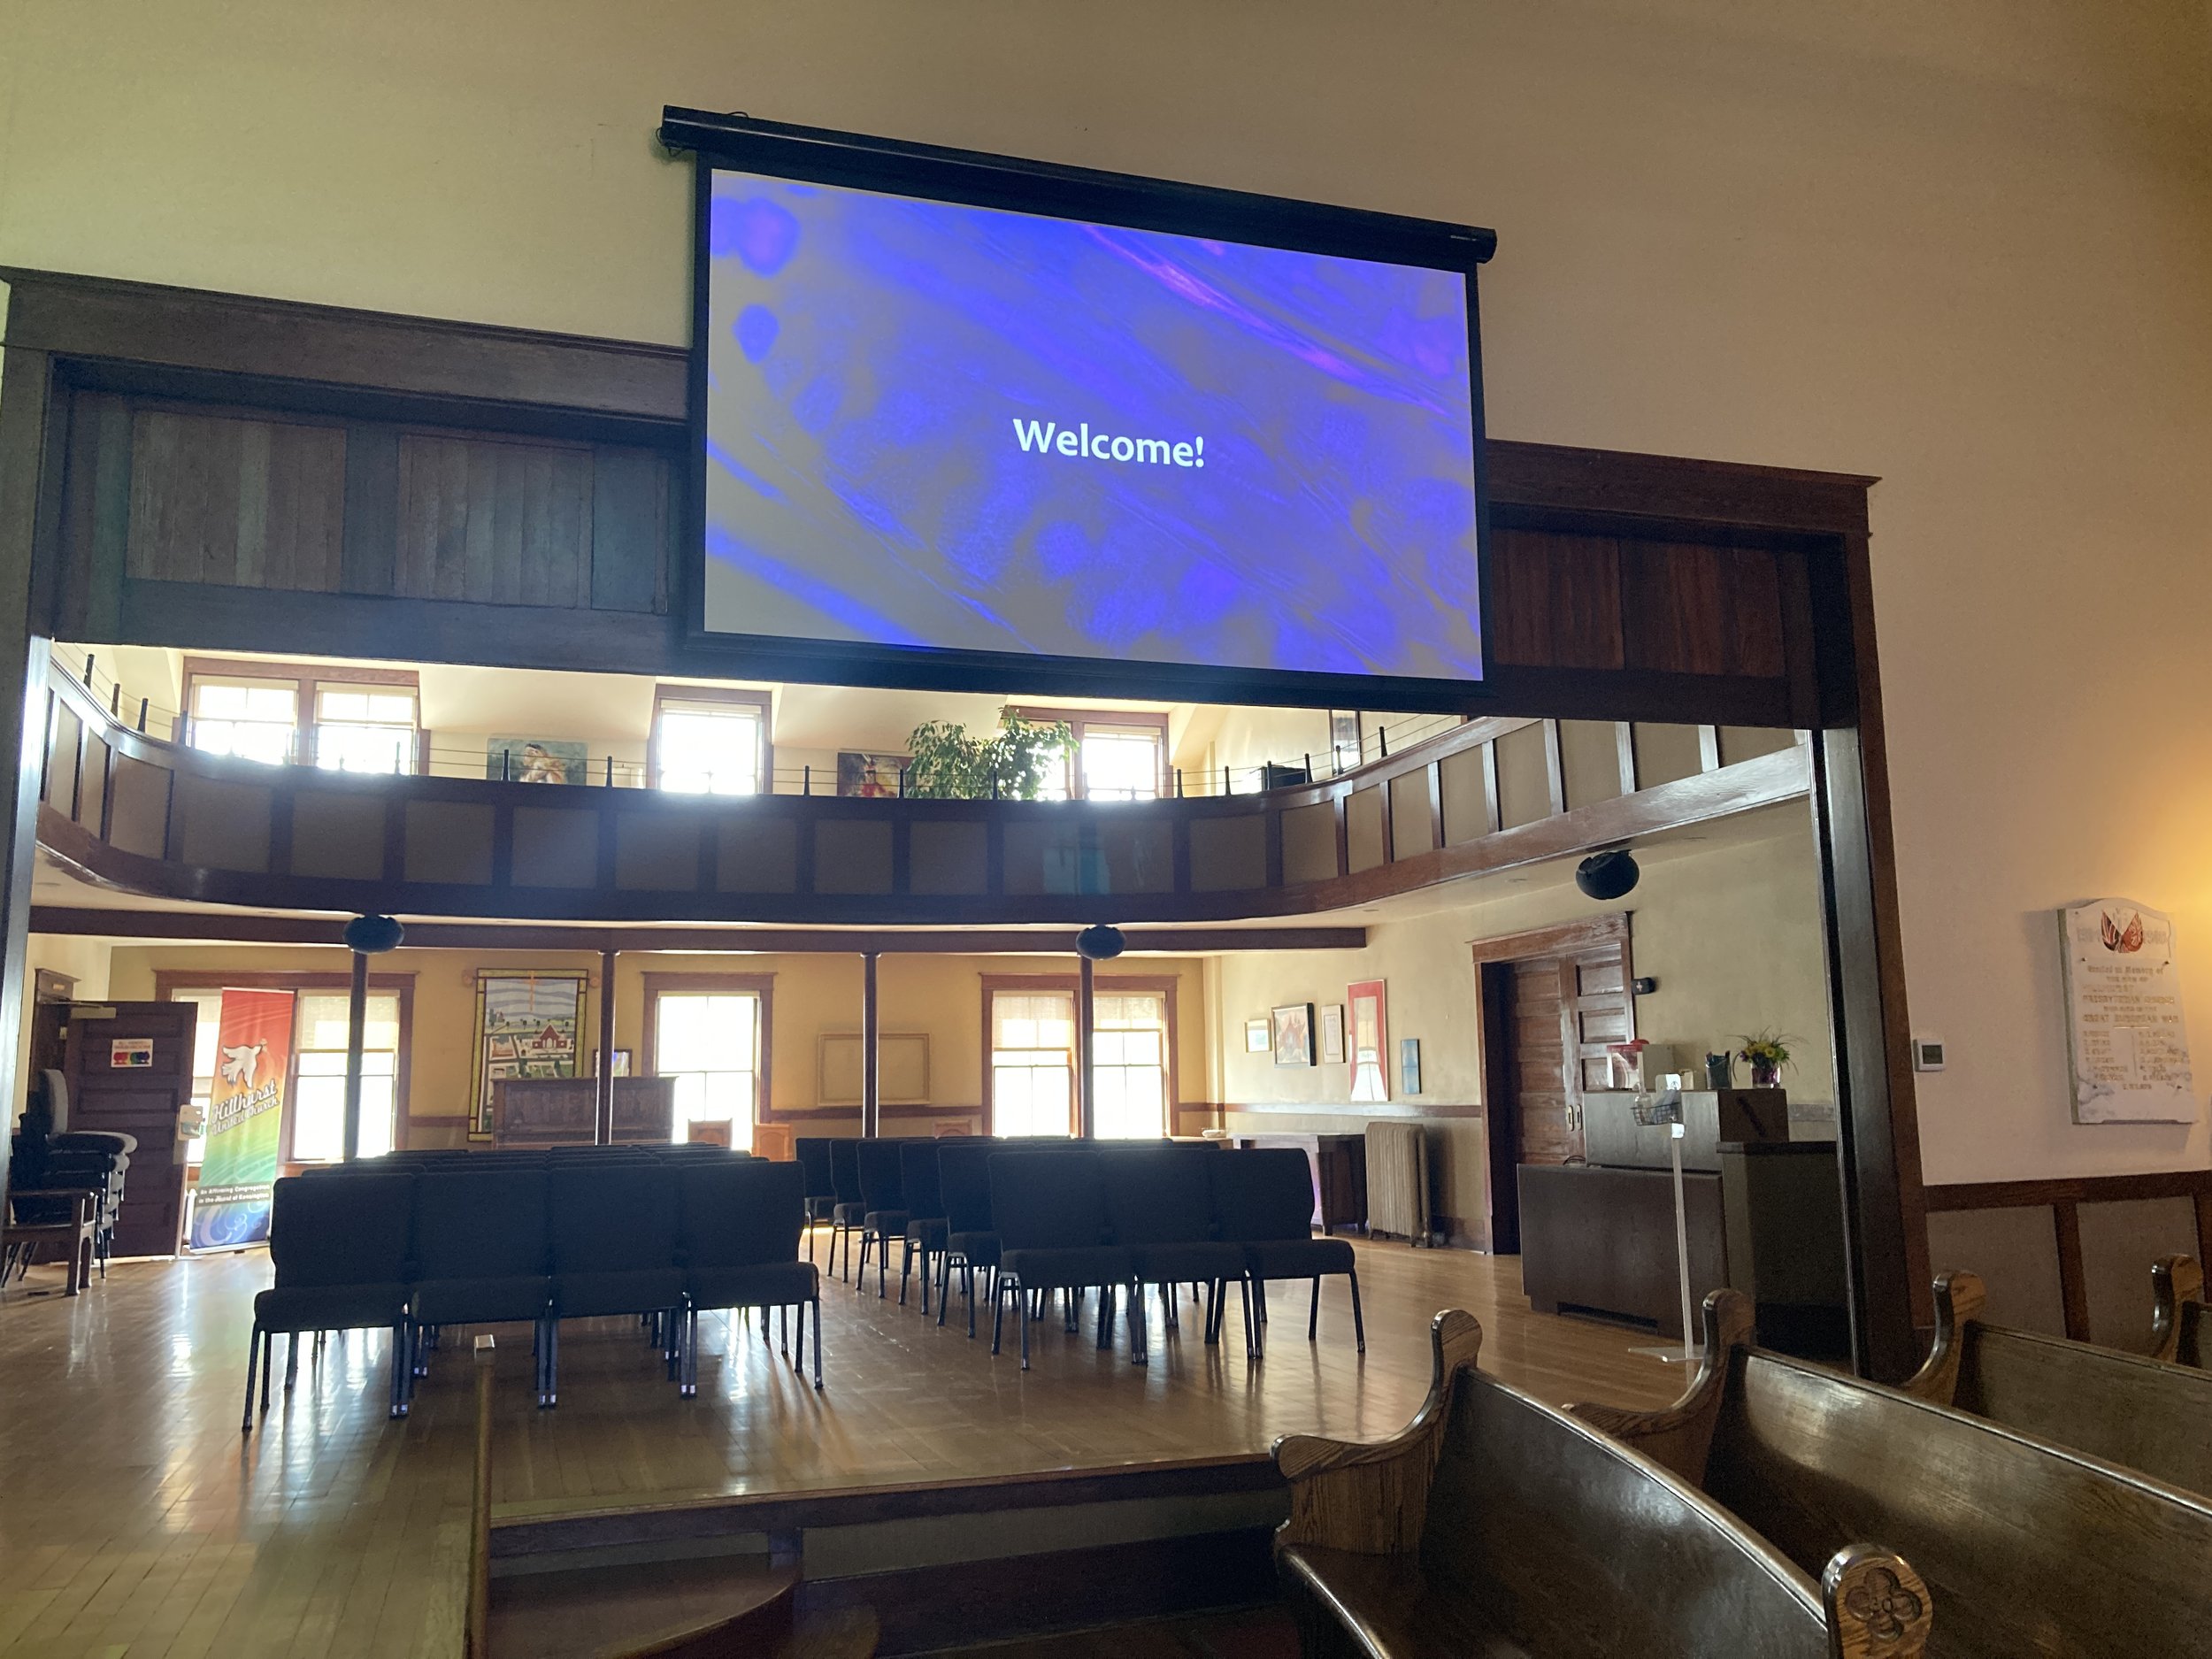  Projector screen in the sanctuary and a view of the Heritage Room. 